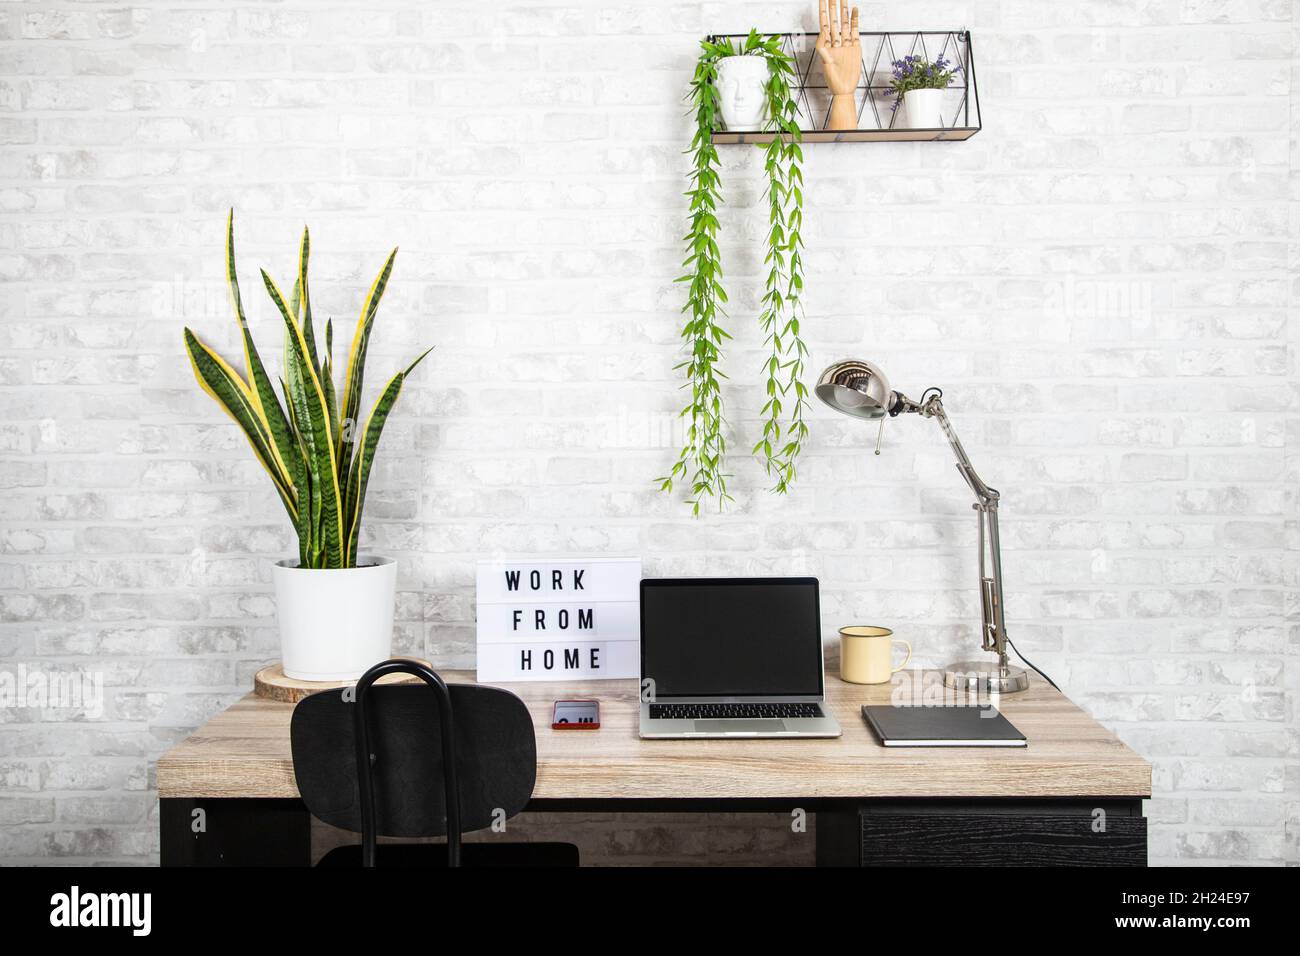 Work space at home. Home office and telecommuting concept Stock Photo